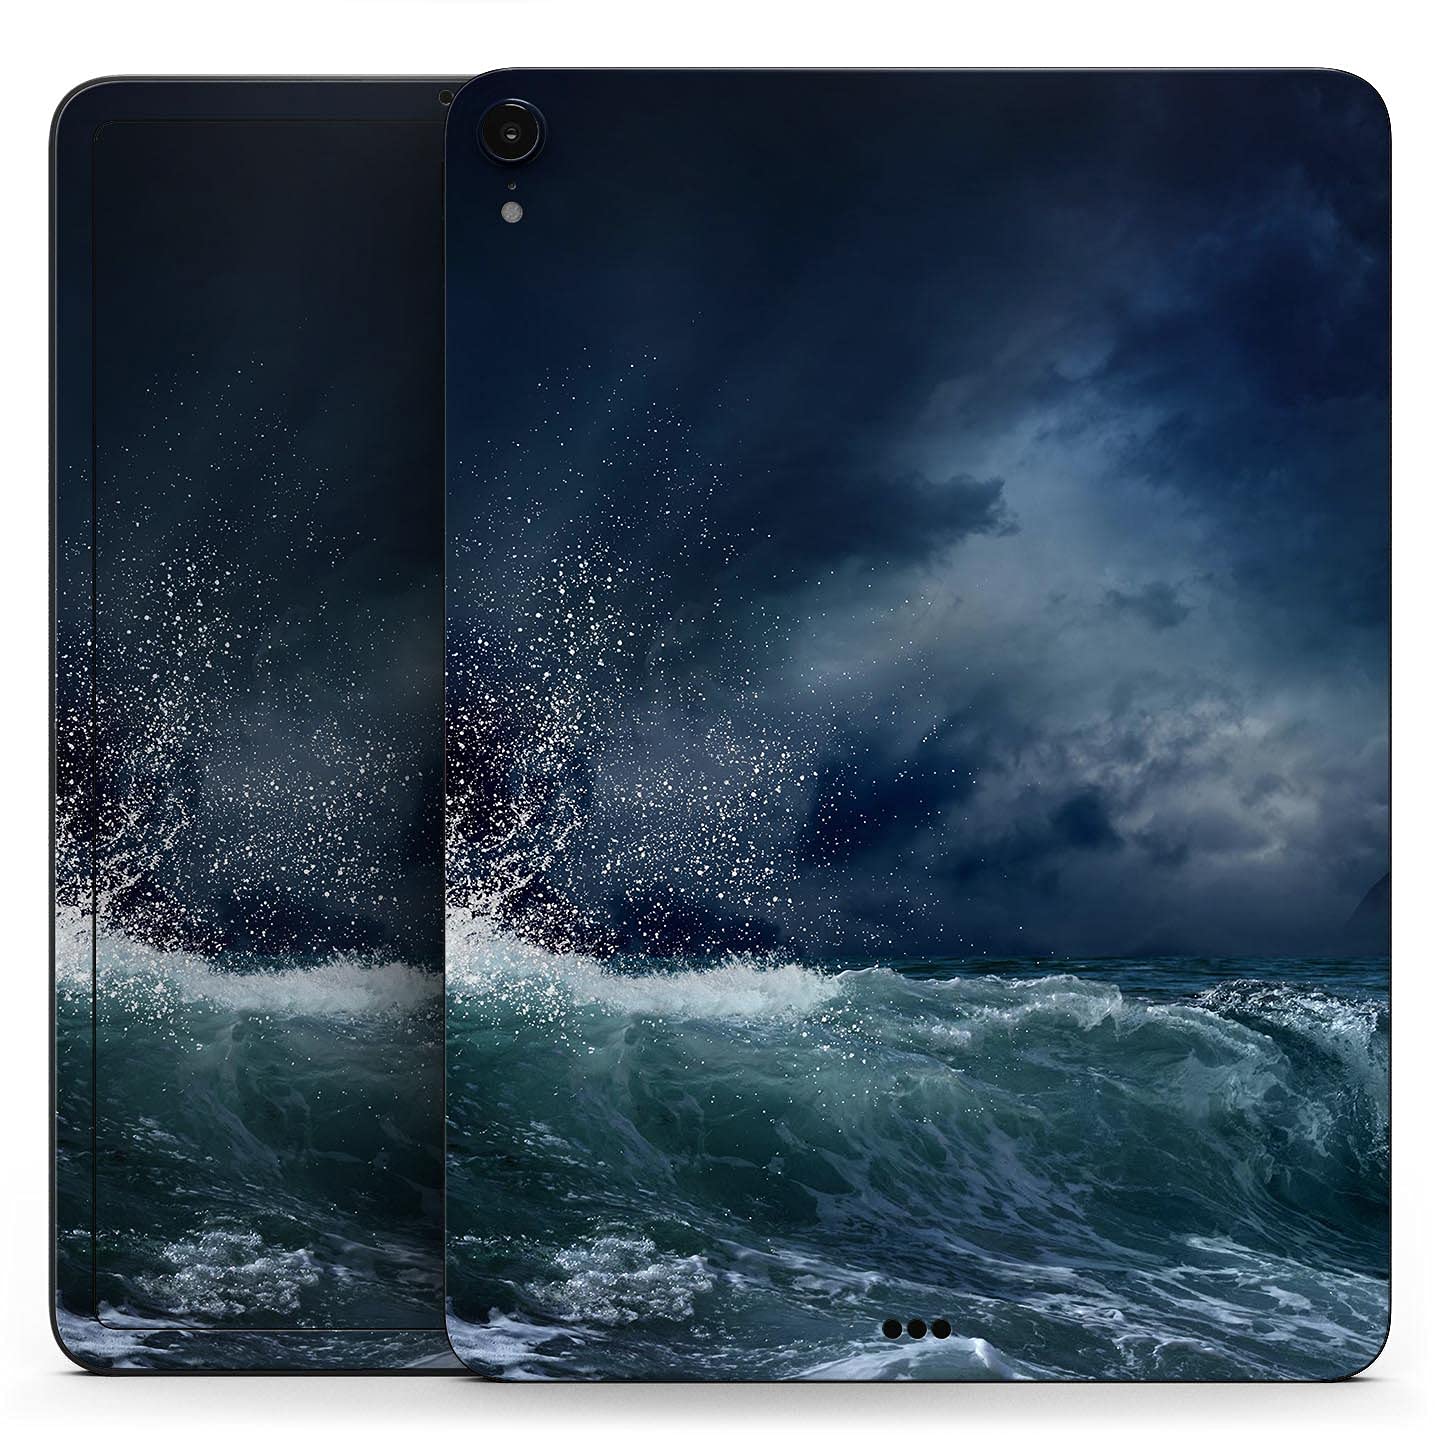 Design Skinz Crashing Waves Full-Body Wrap Decal Protective Skin-Kit Compatible with Apple iPad (A1219/A1337)